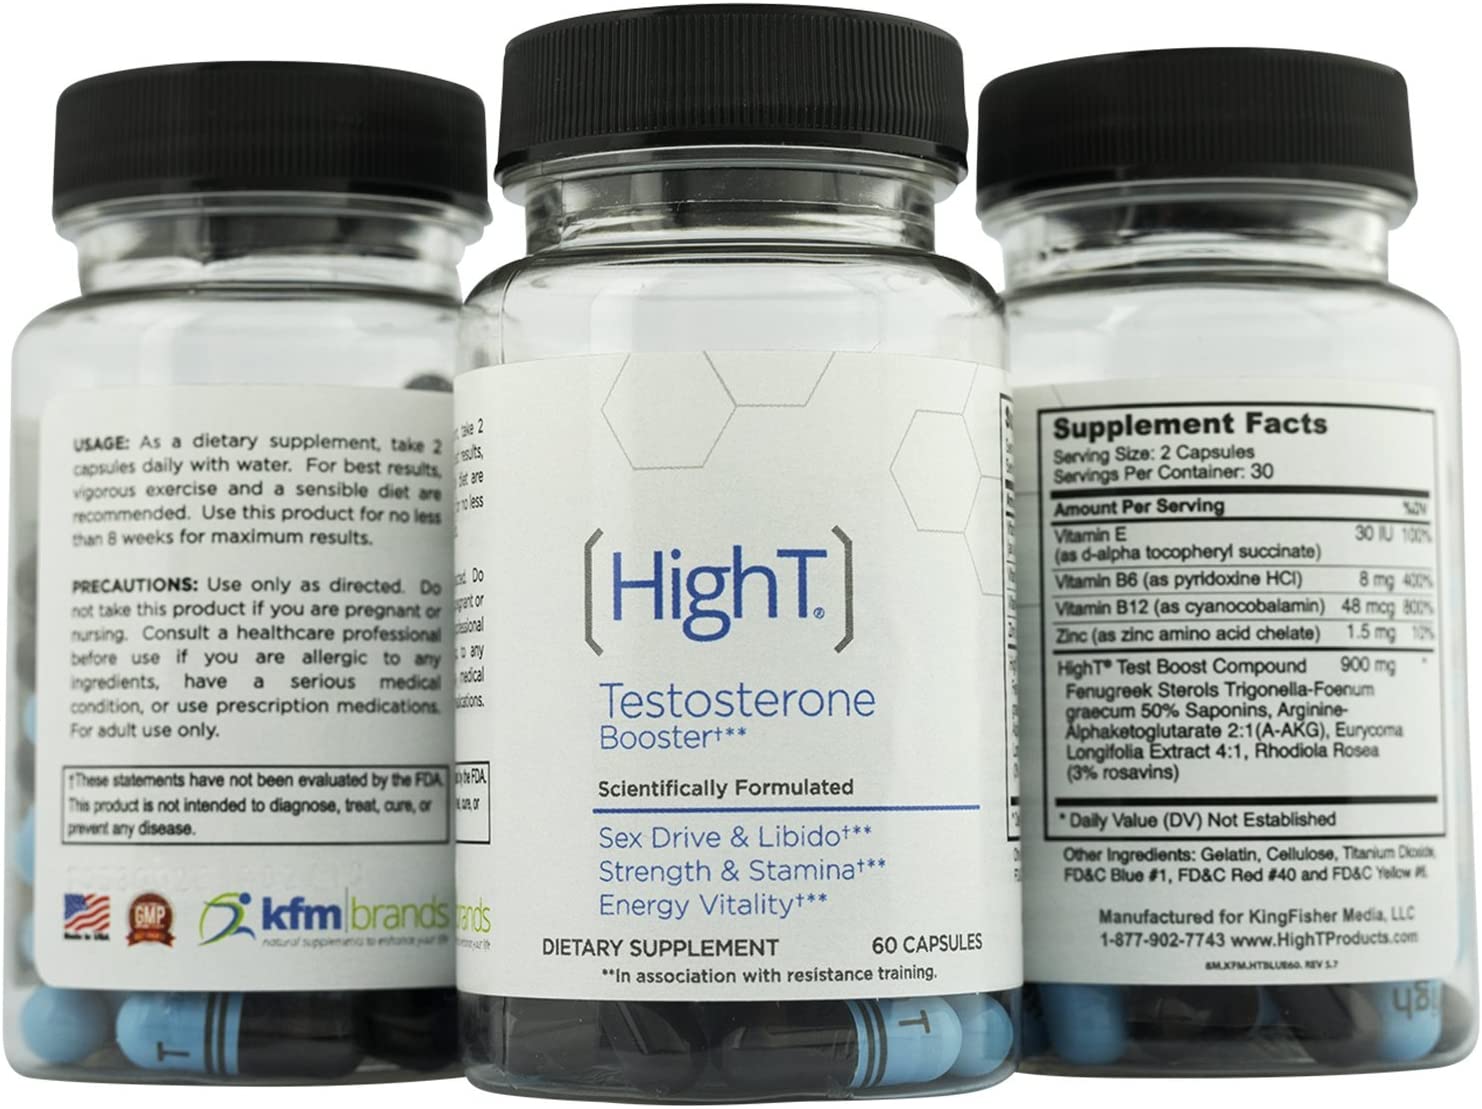 High T ingredients and supplement facts